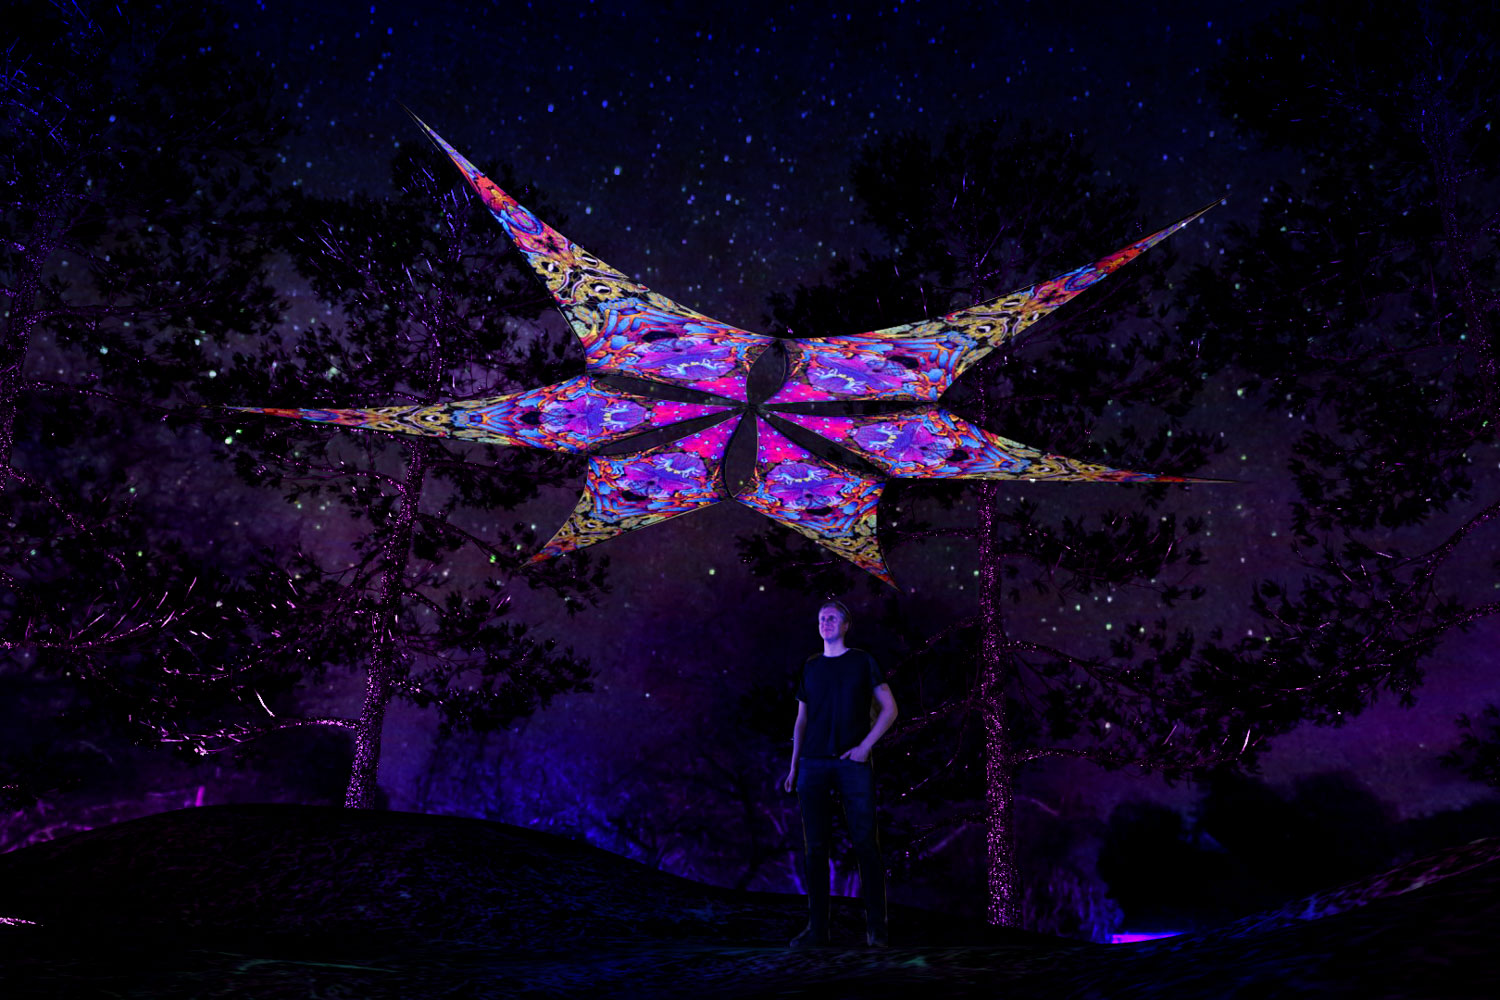 Monkeys - Psychedelic UV-Reactive Ceiling Decoration Canopy 6 Petals